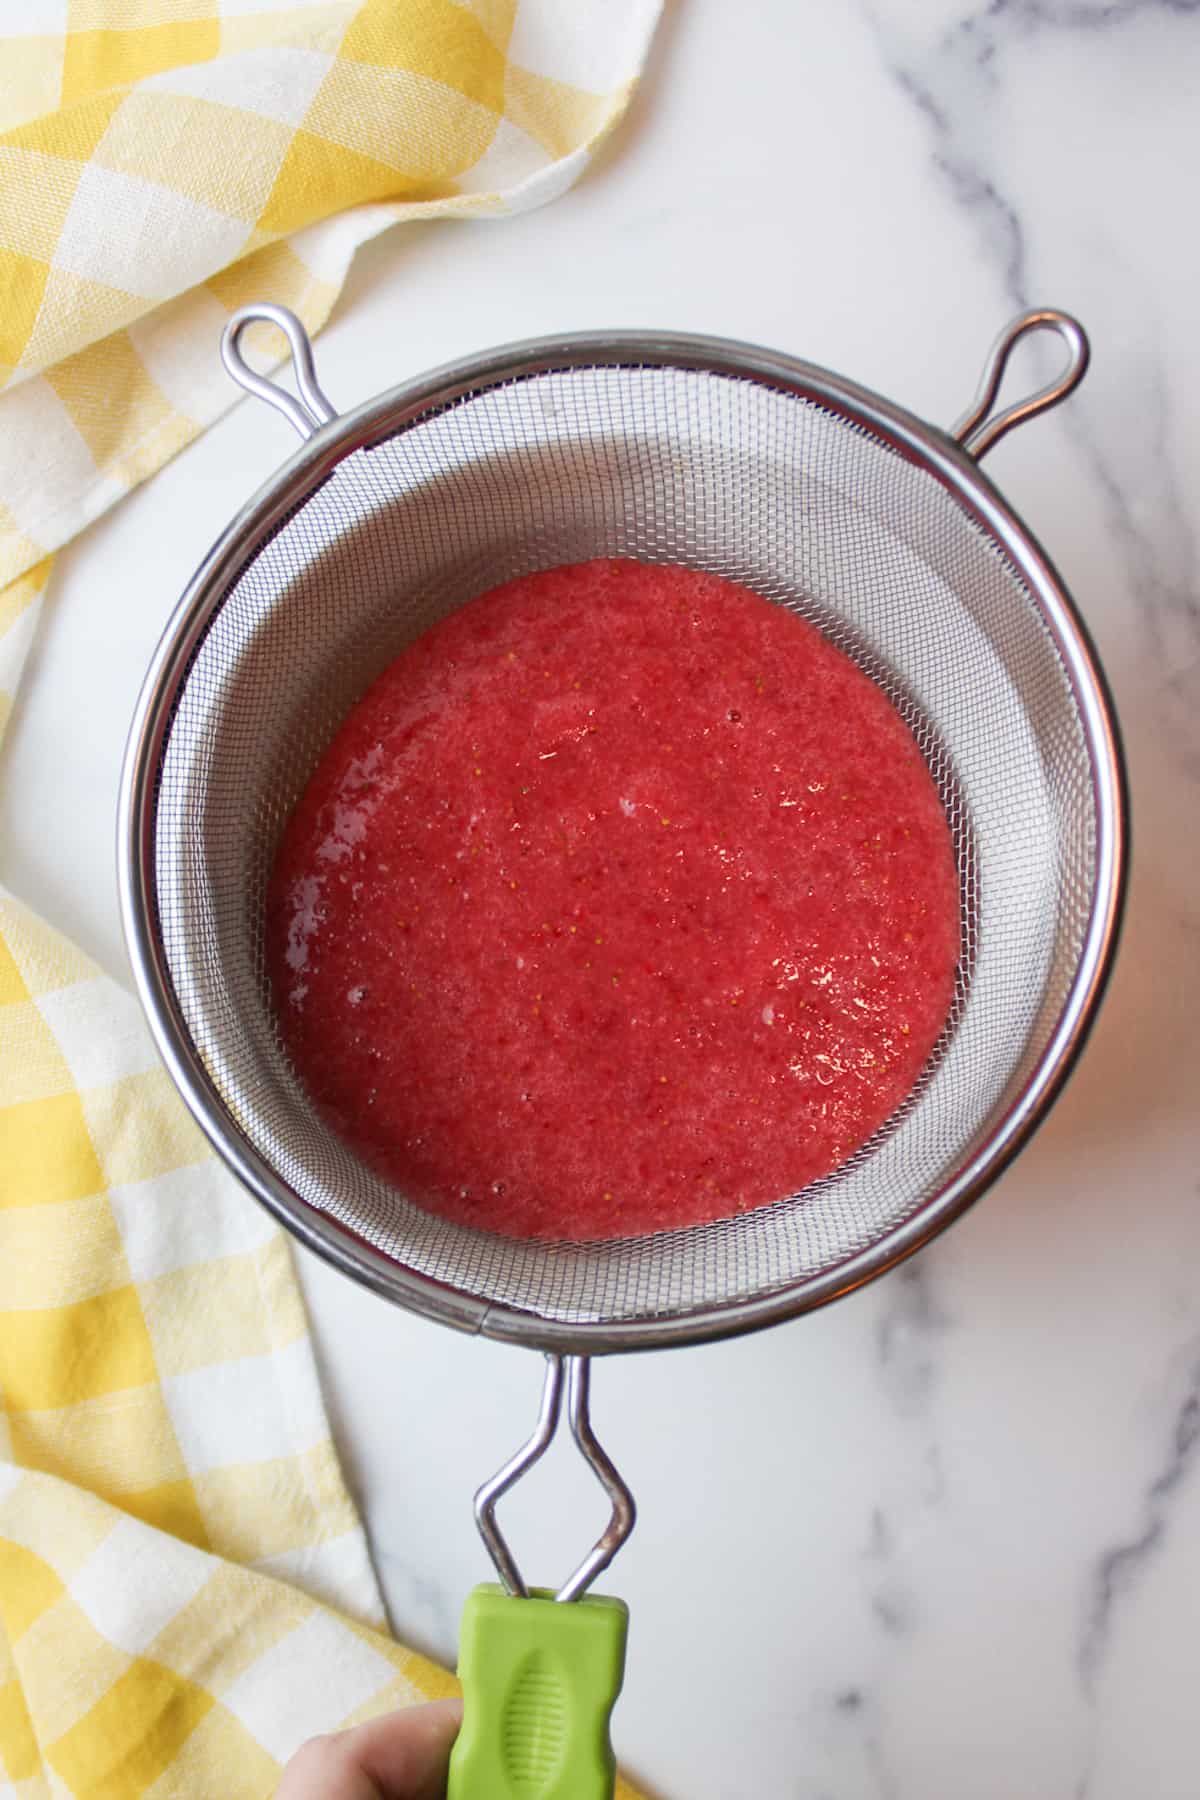 strawberry puree in a sieve over a bowl.